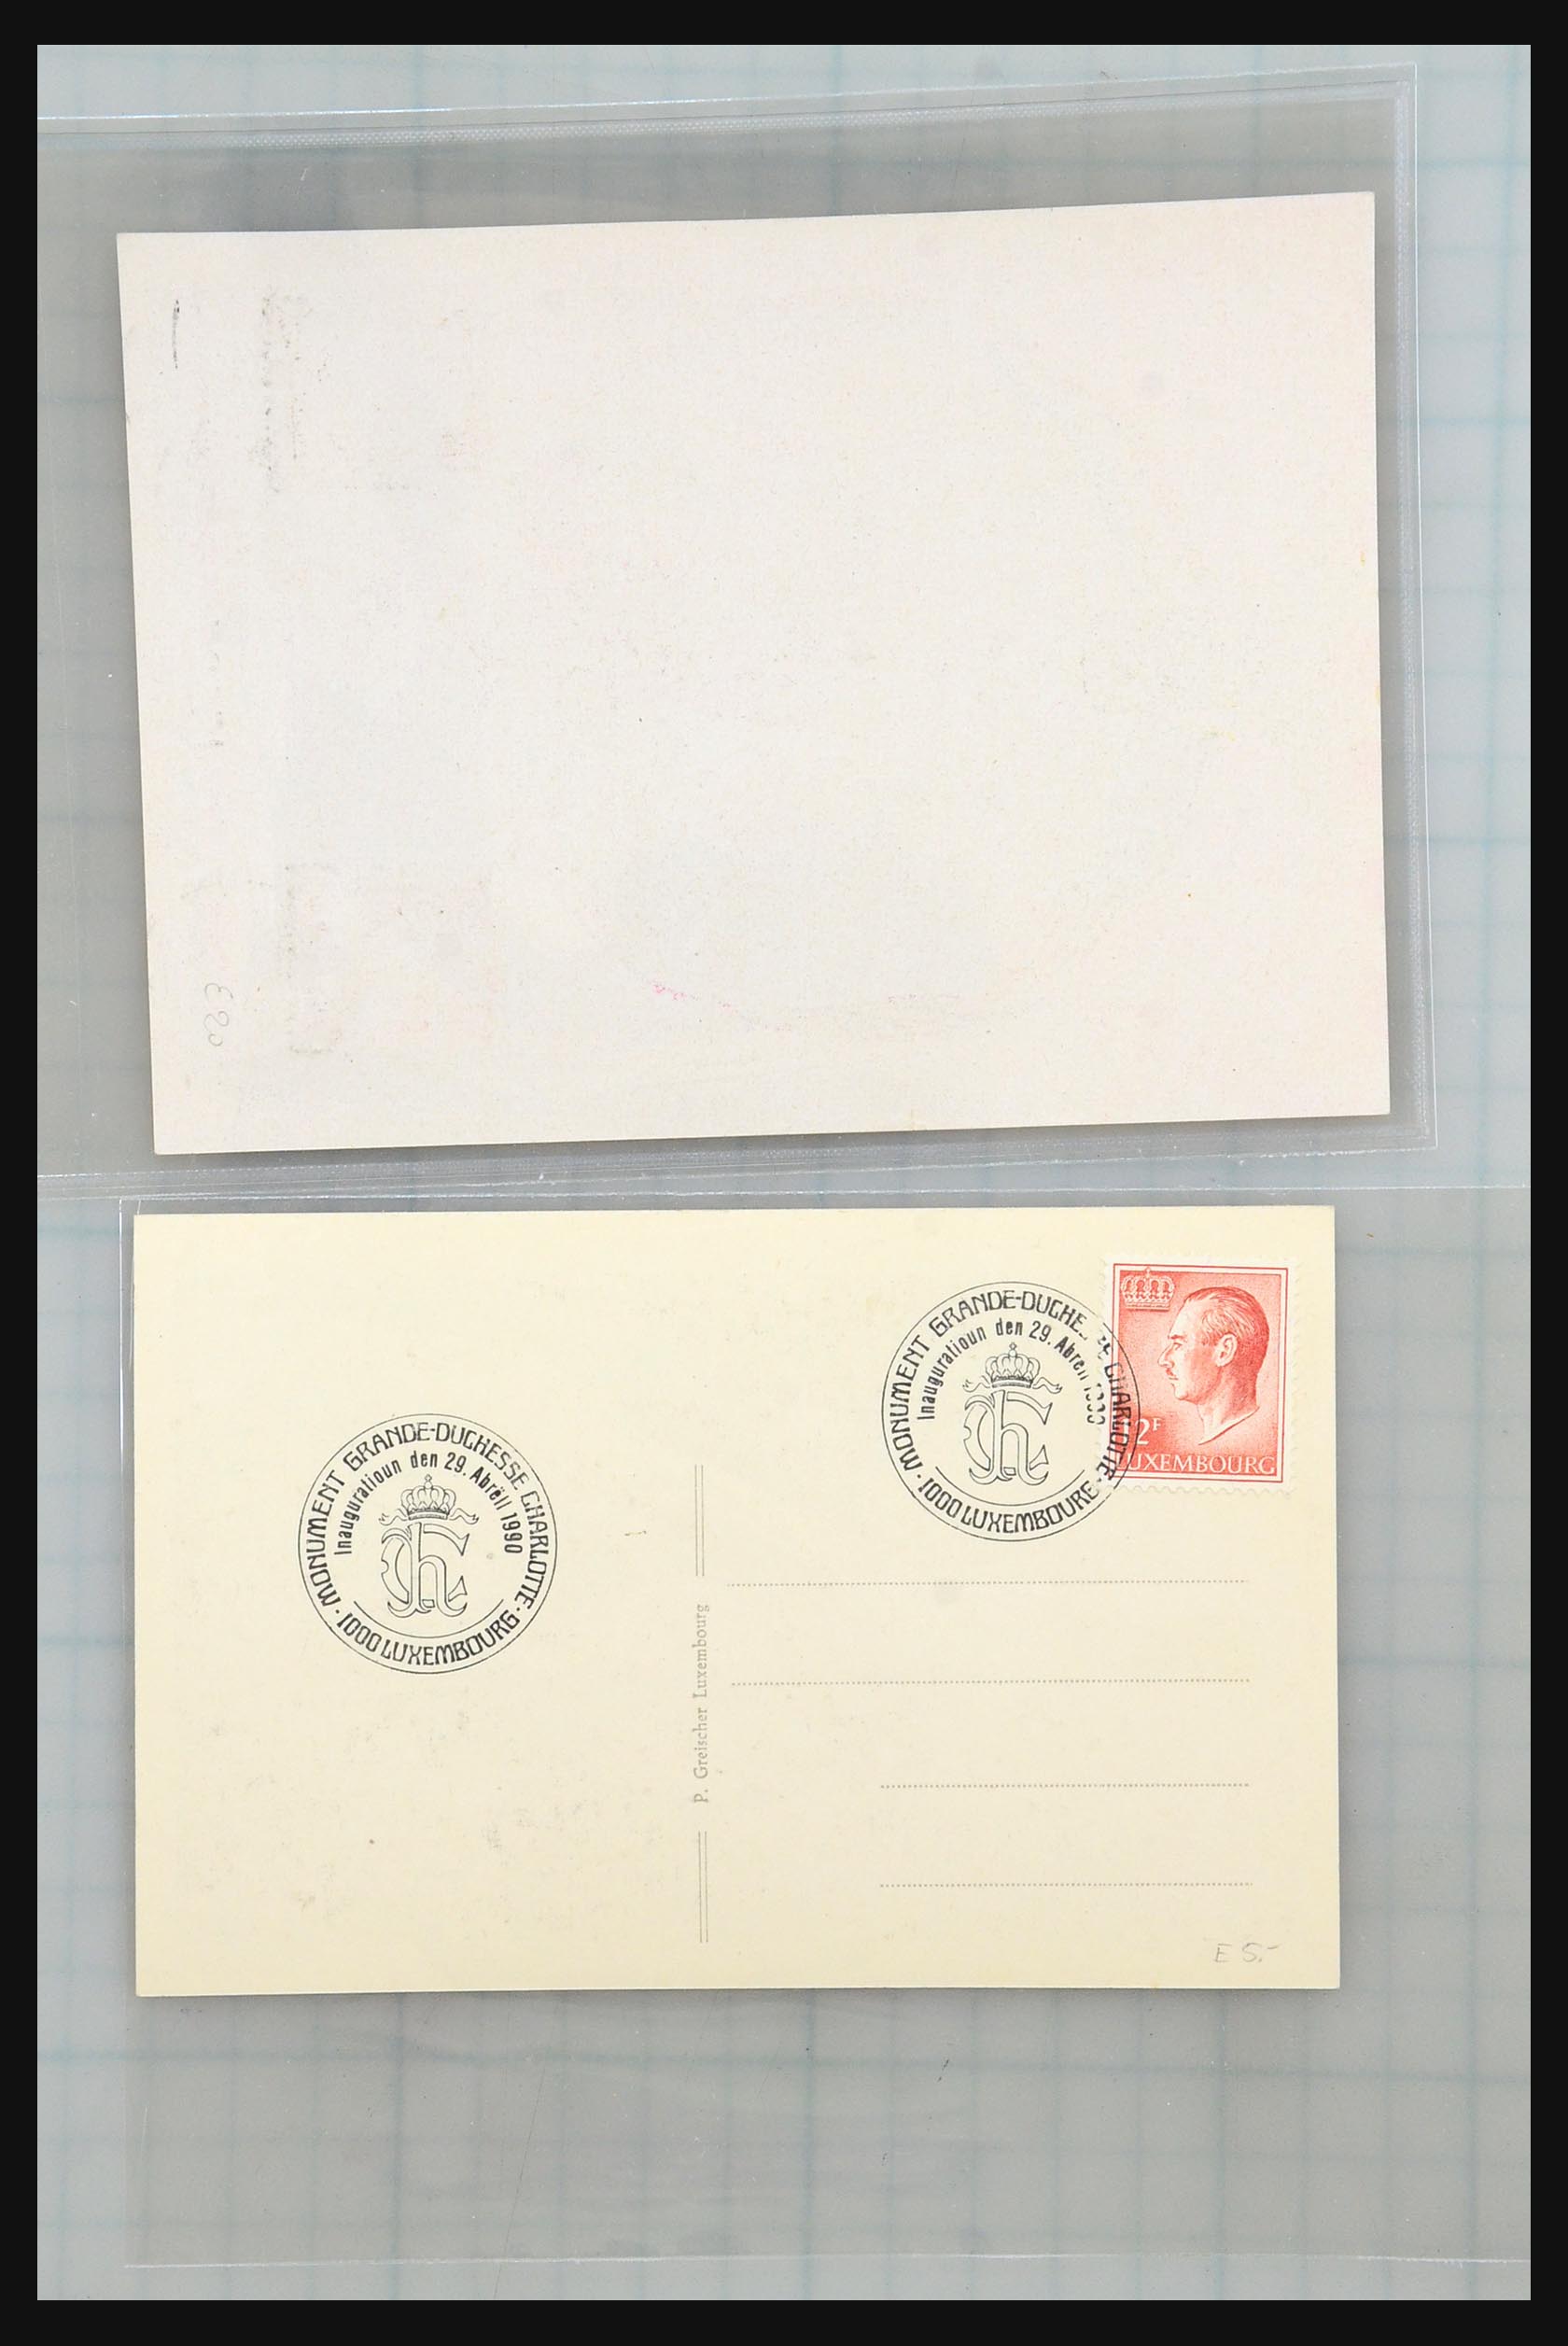 31358 009 - 31358 Portugal/Luxemburg/Greece covers 1880-1960.